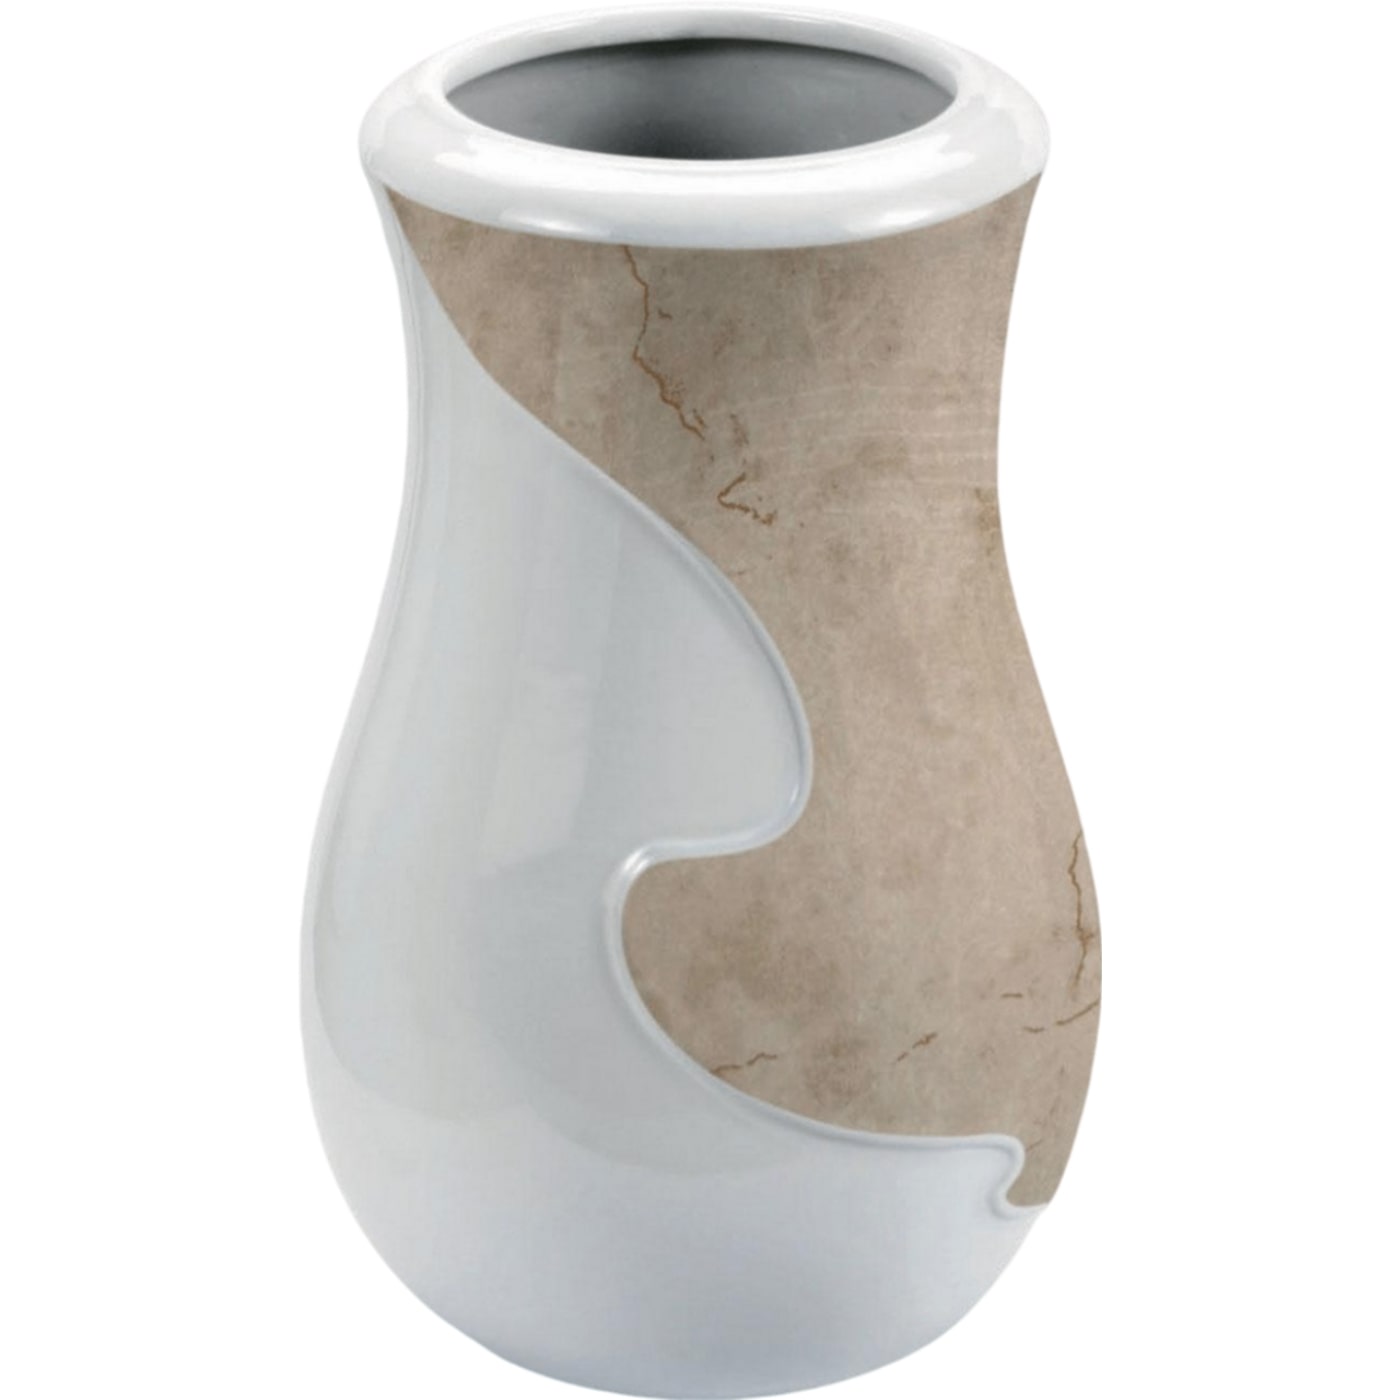 Grave vase Anna botticino 21x13cm - 8.3x5.1in In white porcelain with botticino decoration, wall attached ANN134P/BOTT